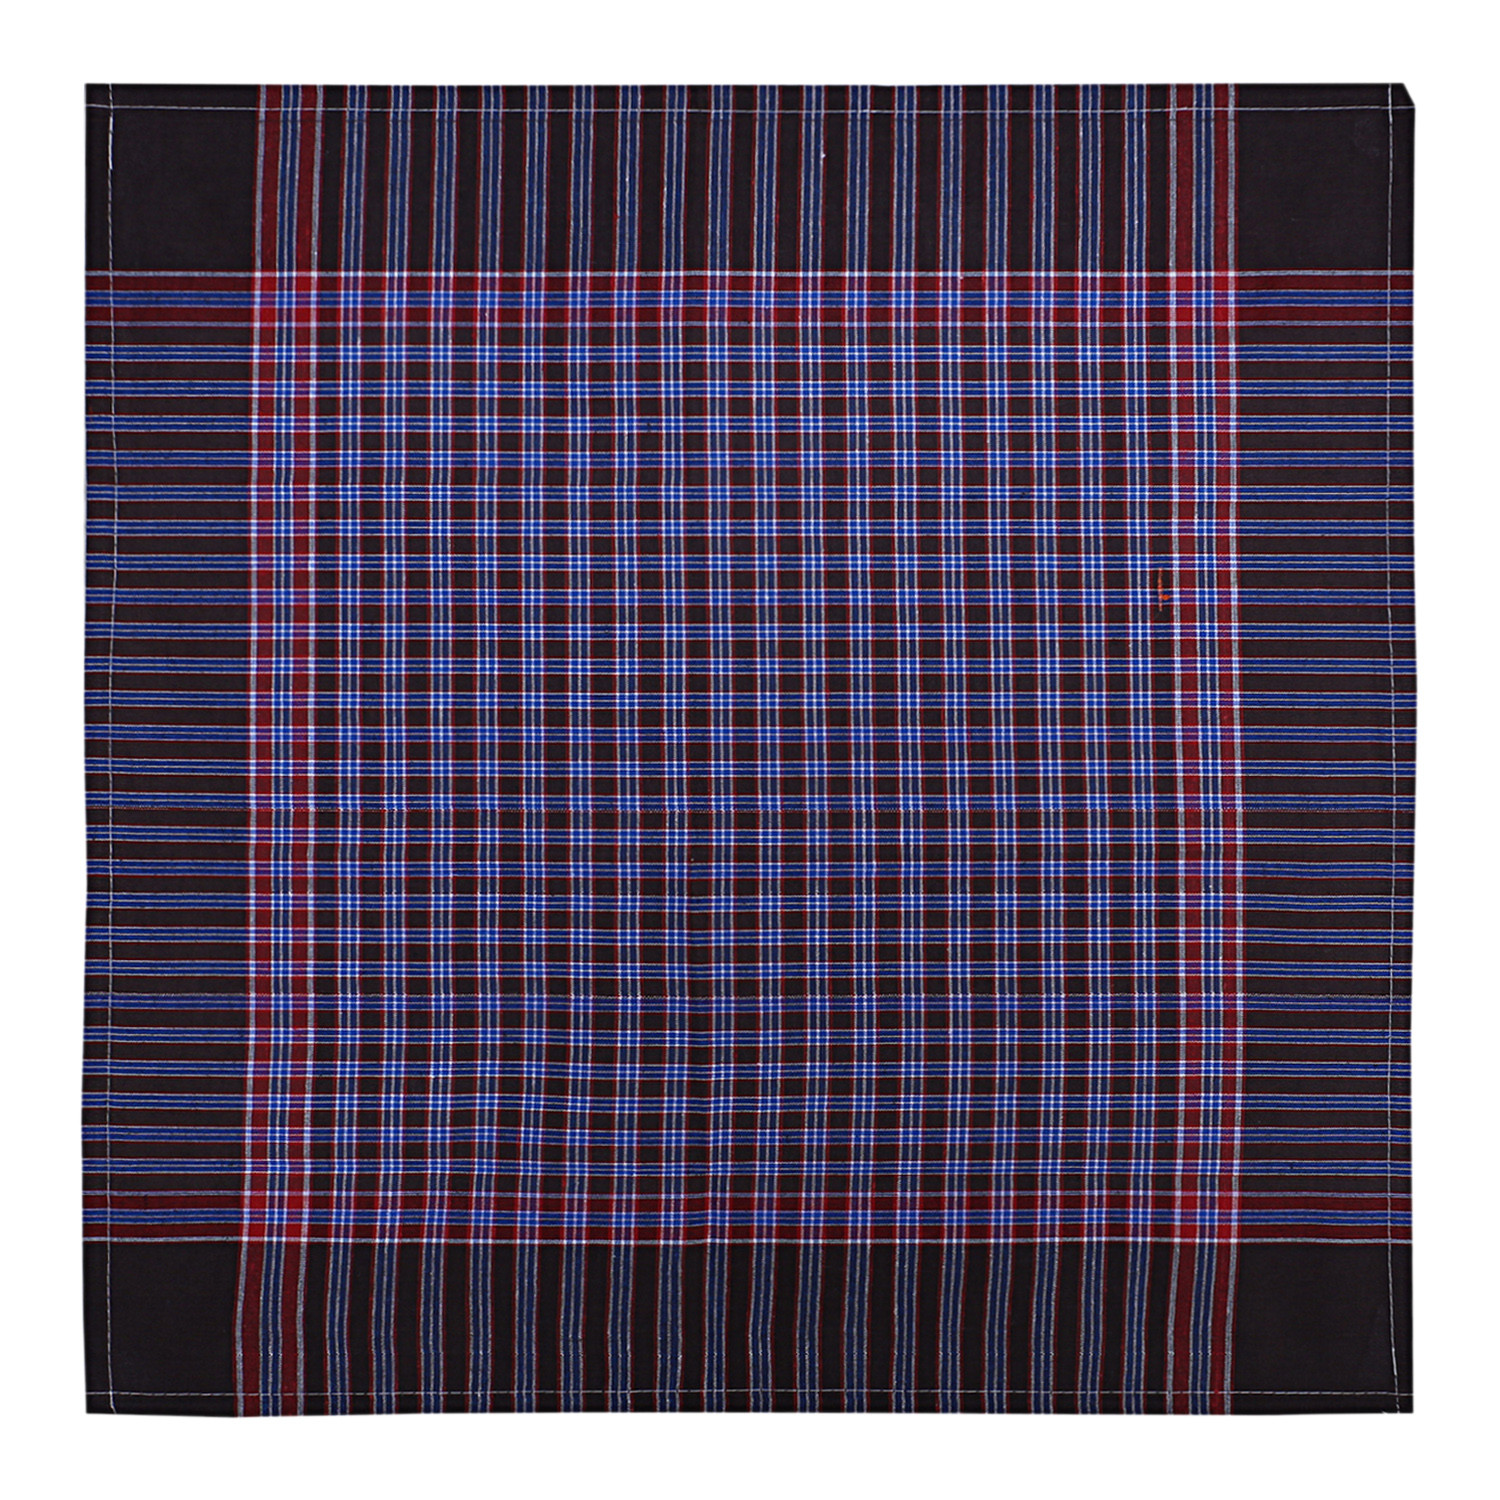 Kuber Industries Handkerchiefs|Sweat Absorbent Gingham Check Dark Colored Soft Cotton Square Hankies For Man,Boys & Wicking Sweat from Hands,Face (Multicolor)